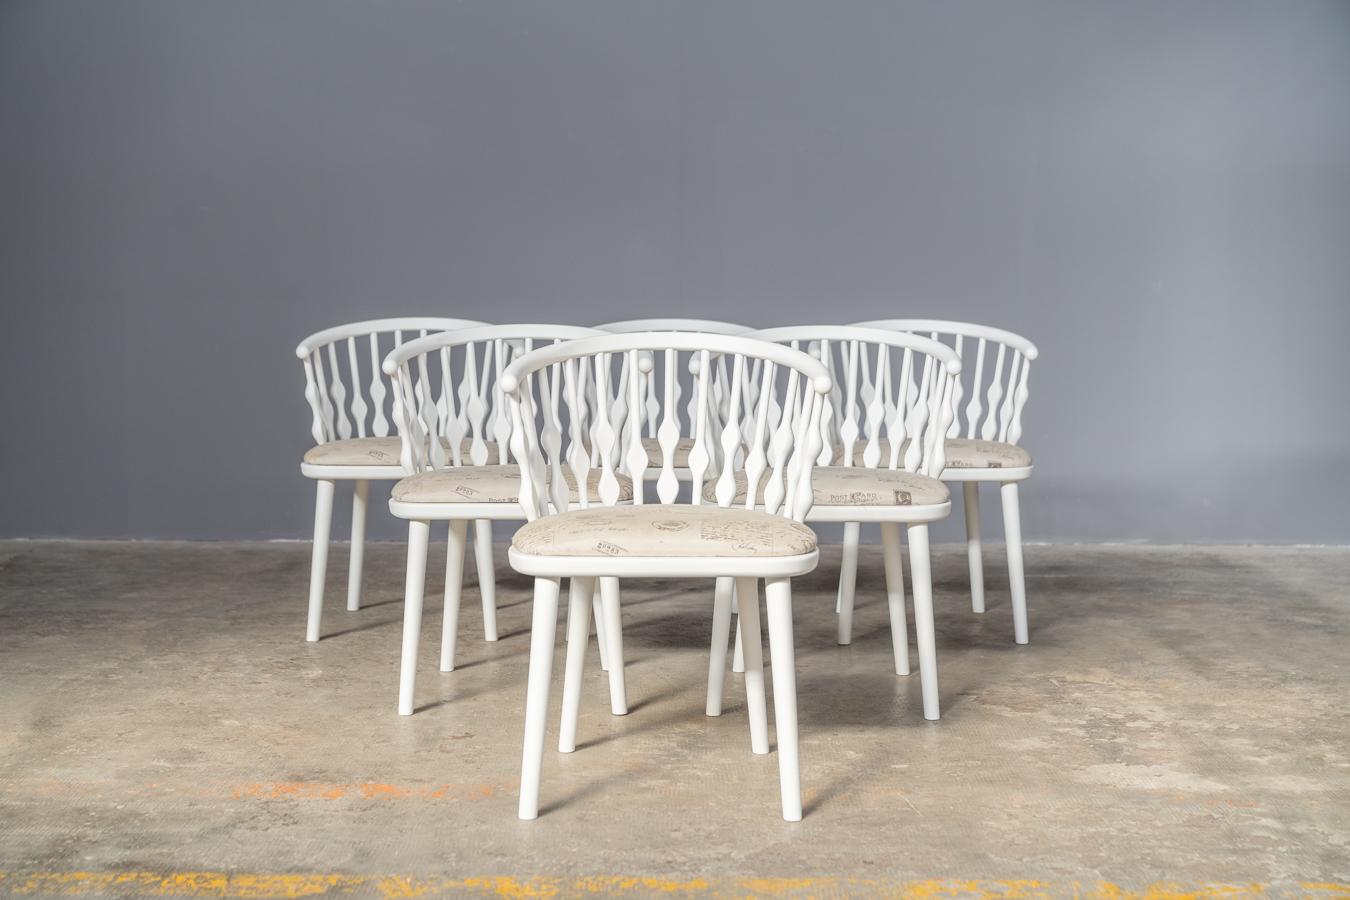 Matt white painted beech chair with seat upholstered with 1970 fabric
Backrest with machined slats and steam-curved backrest - New product for display
Material Beech, Fabric, Polyurethane
Color White
Light Weight - Under 40 kg
Detailed